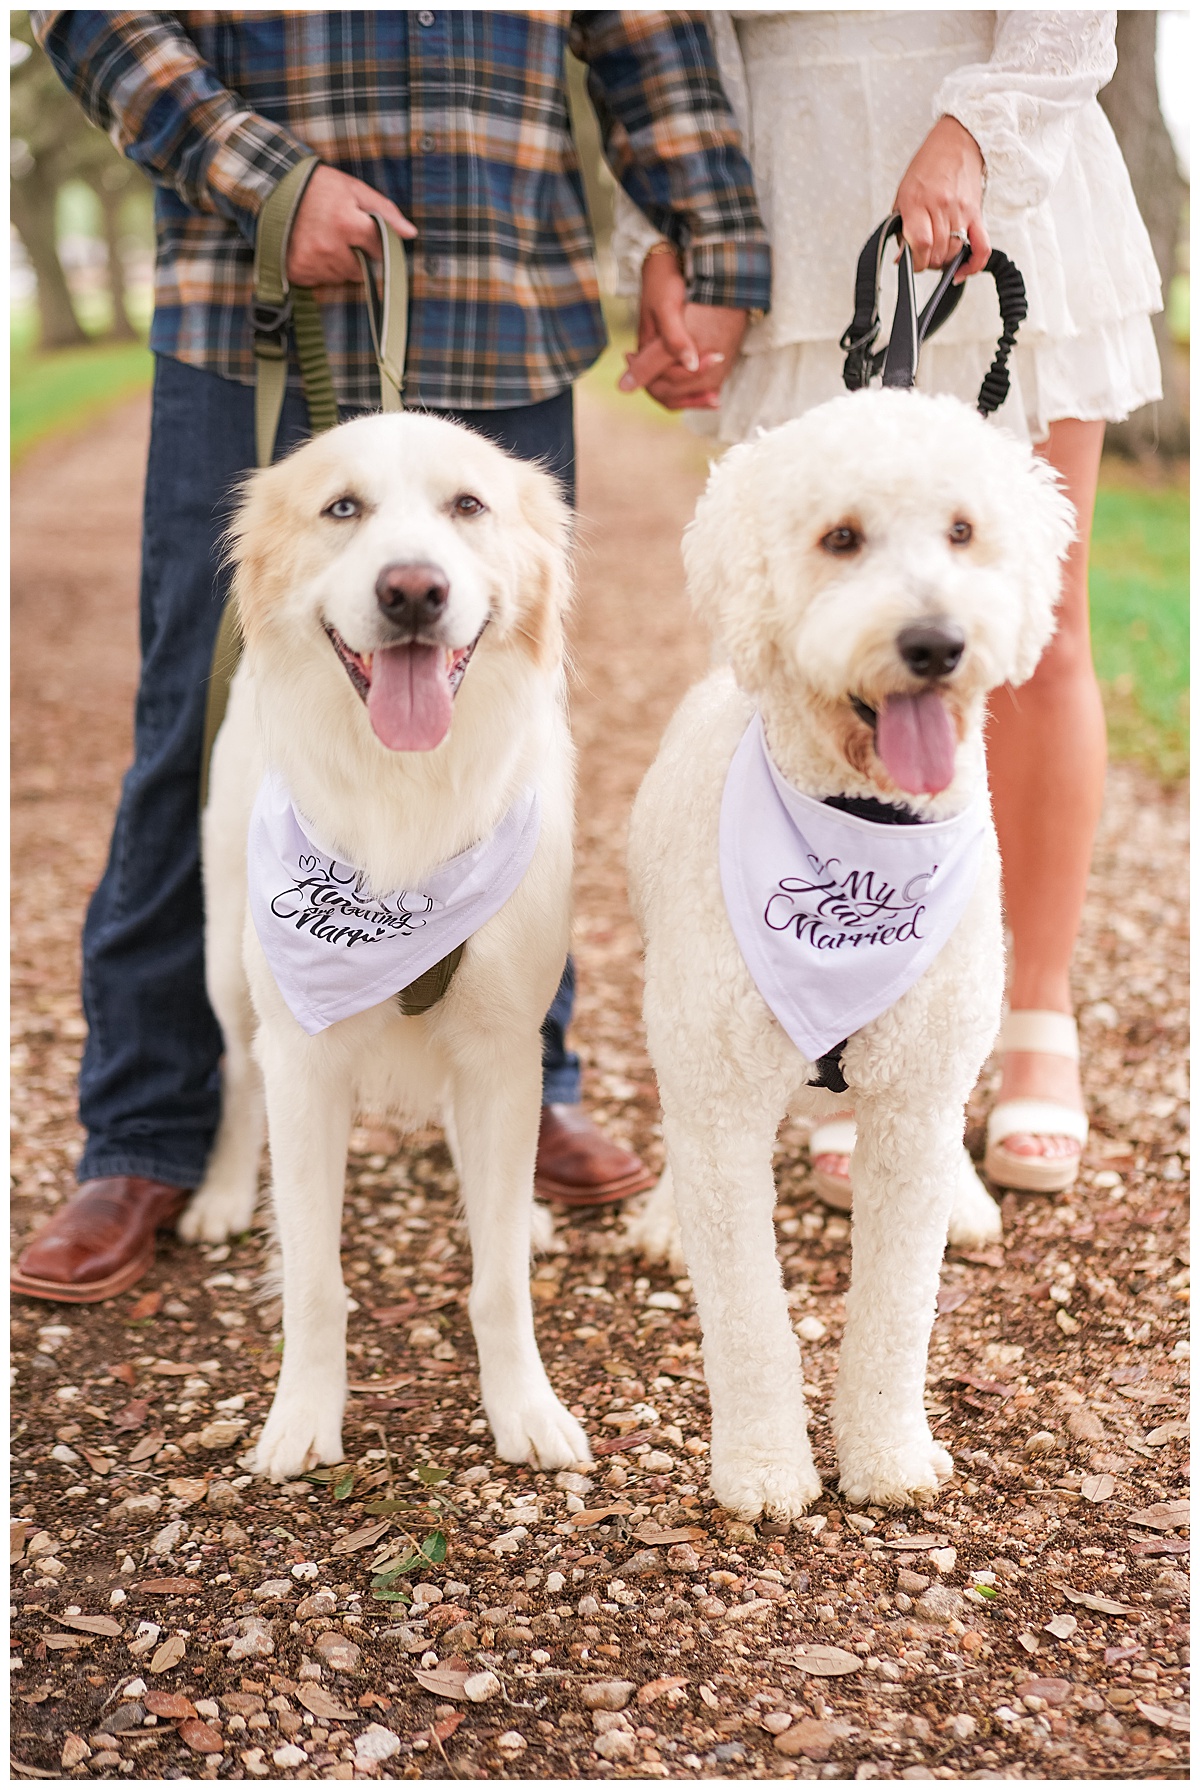 Dogs stand together for Houston’s Best Wedding Photographers